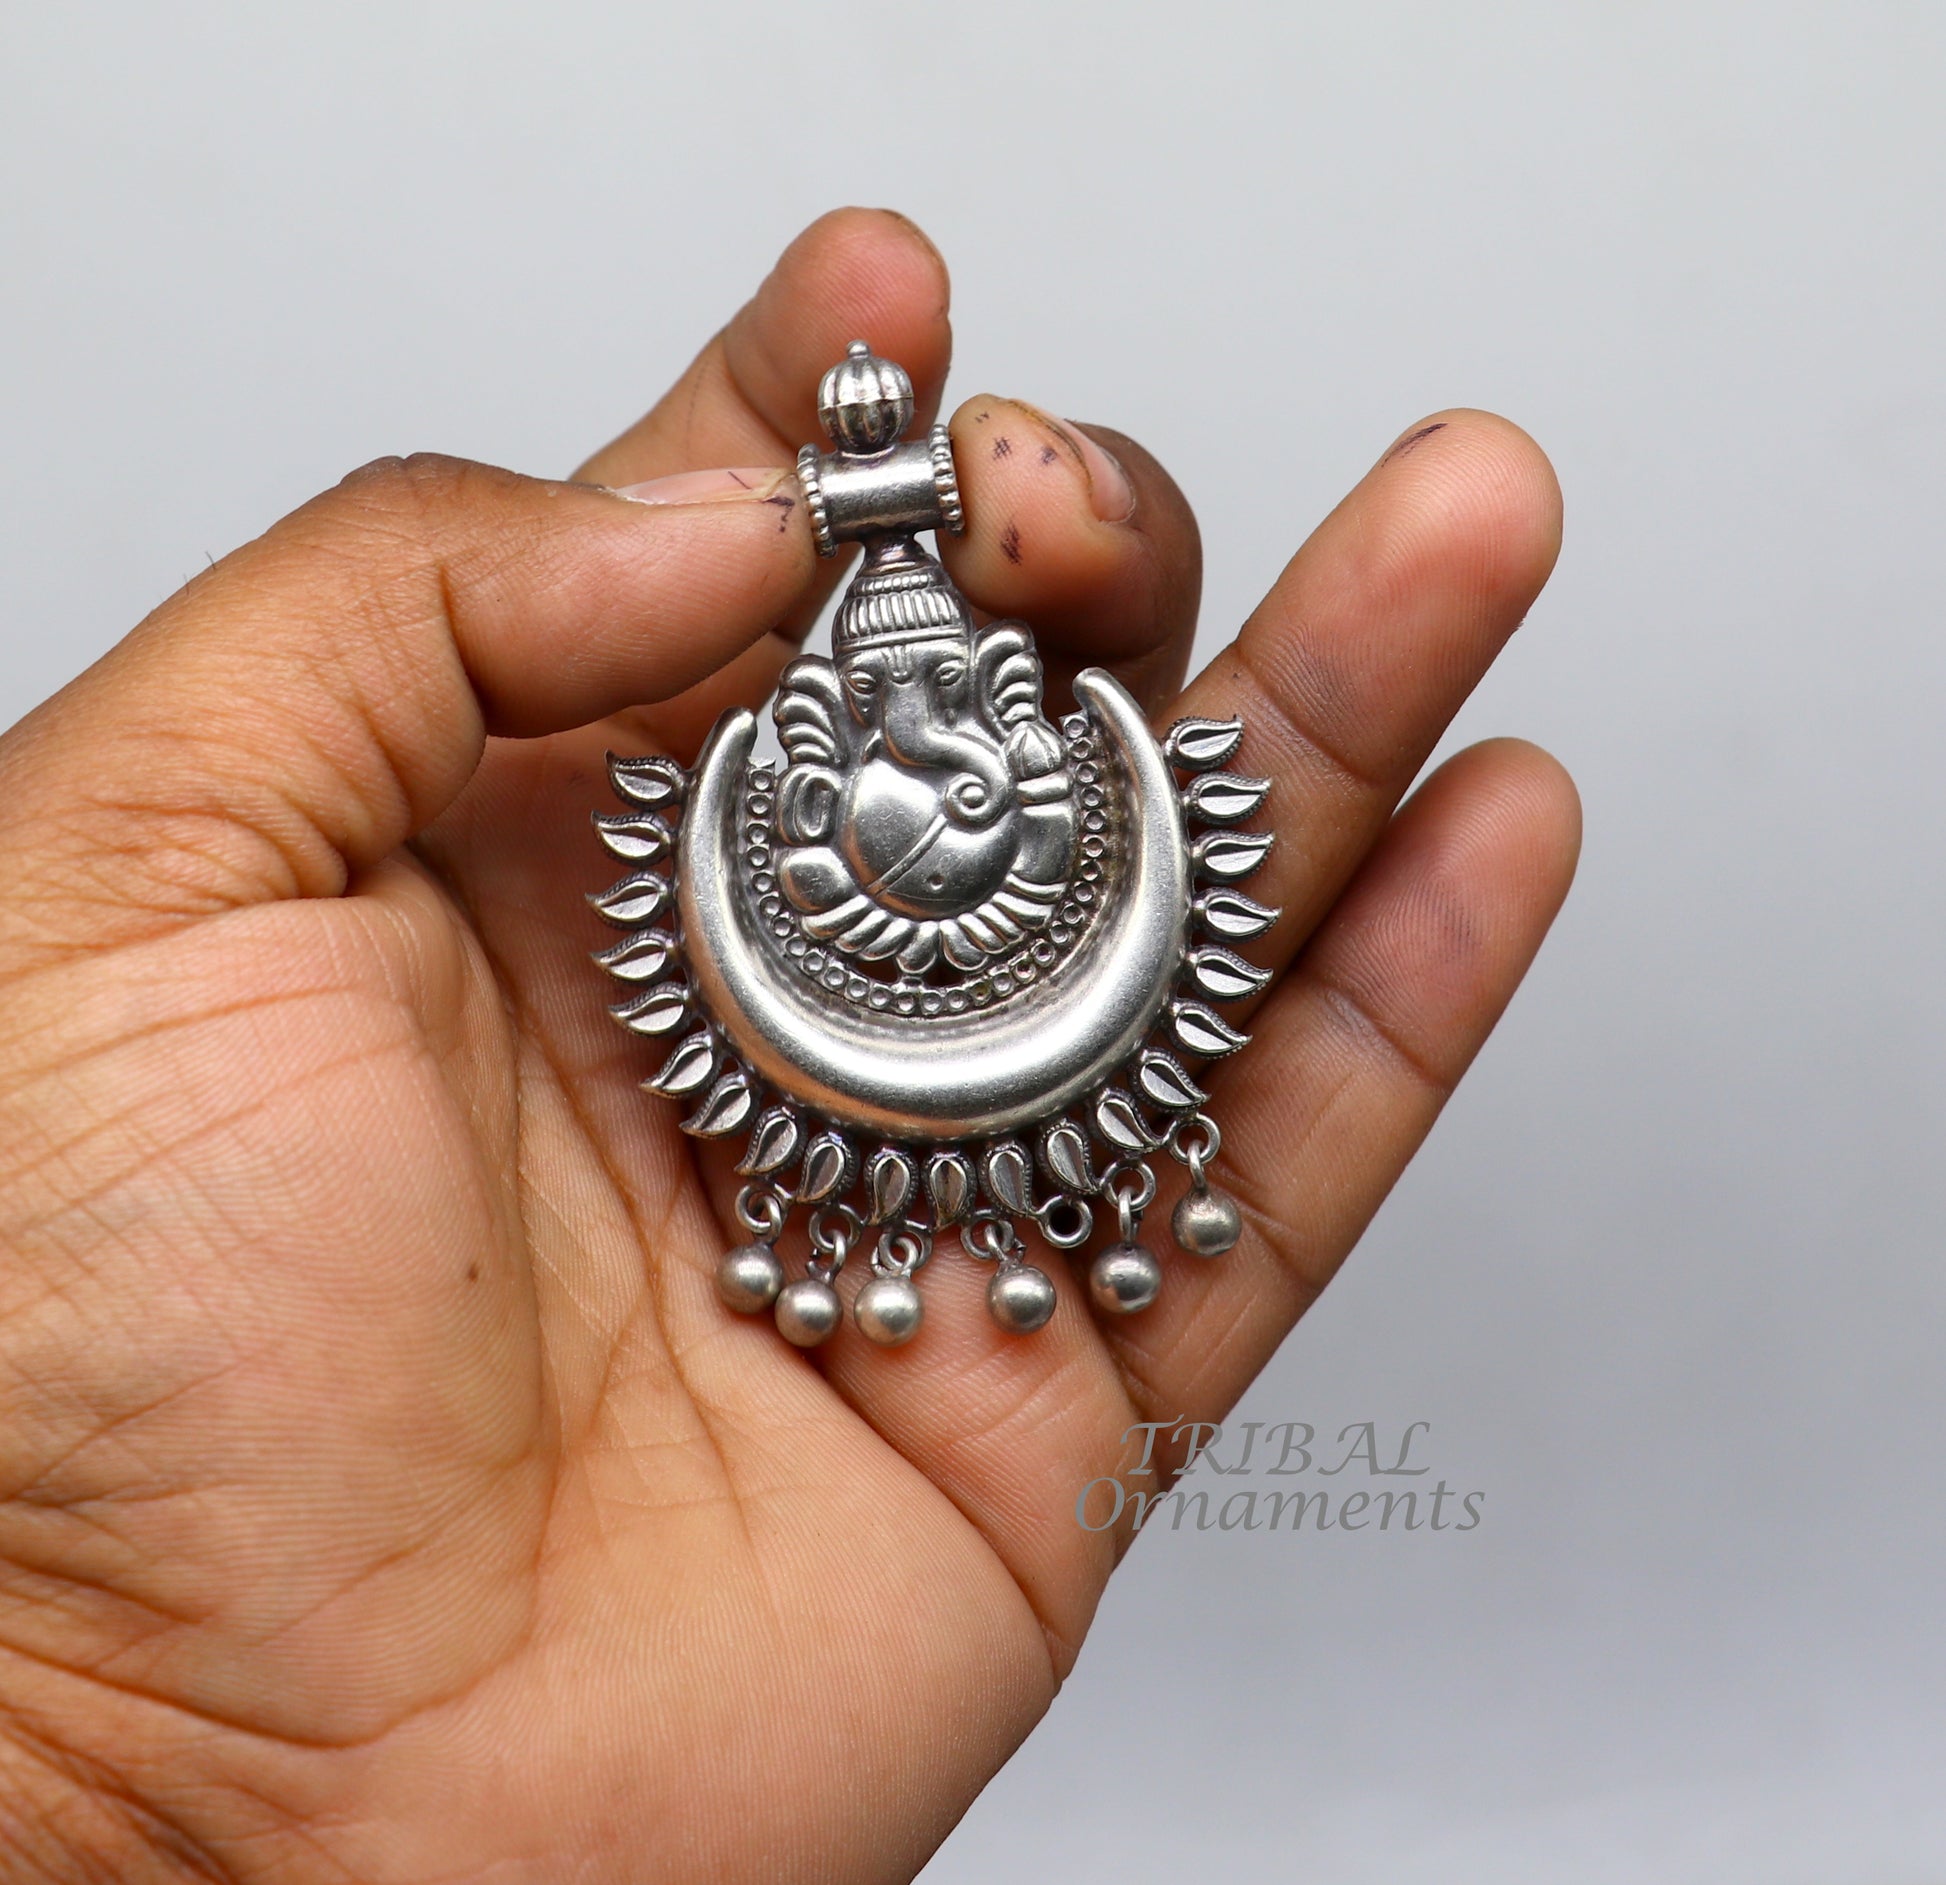 Vintage design 925 silver customized idol lord Ganesha pendant with gorgeous hanging drops, excellent brides gifting fancy pendant ssp362 - TRIBAL ORNAMENTS